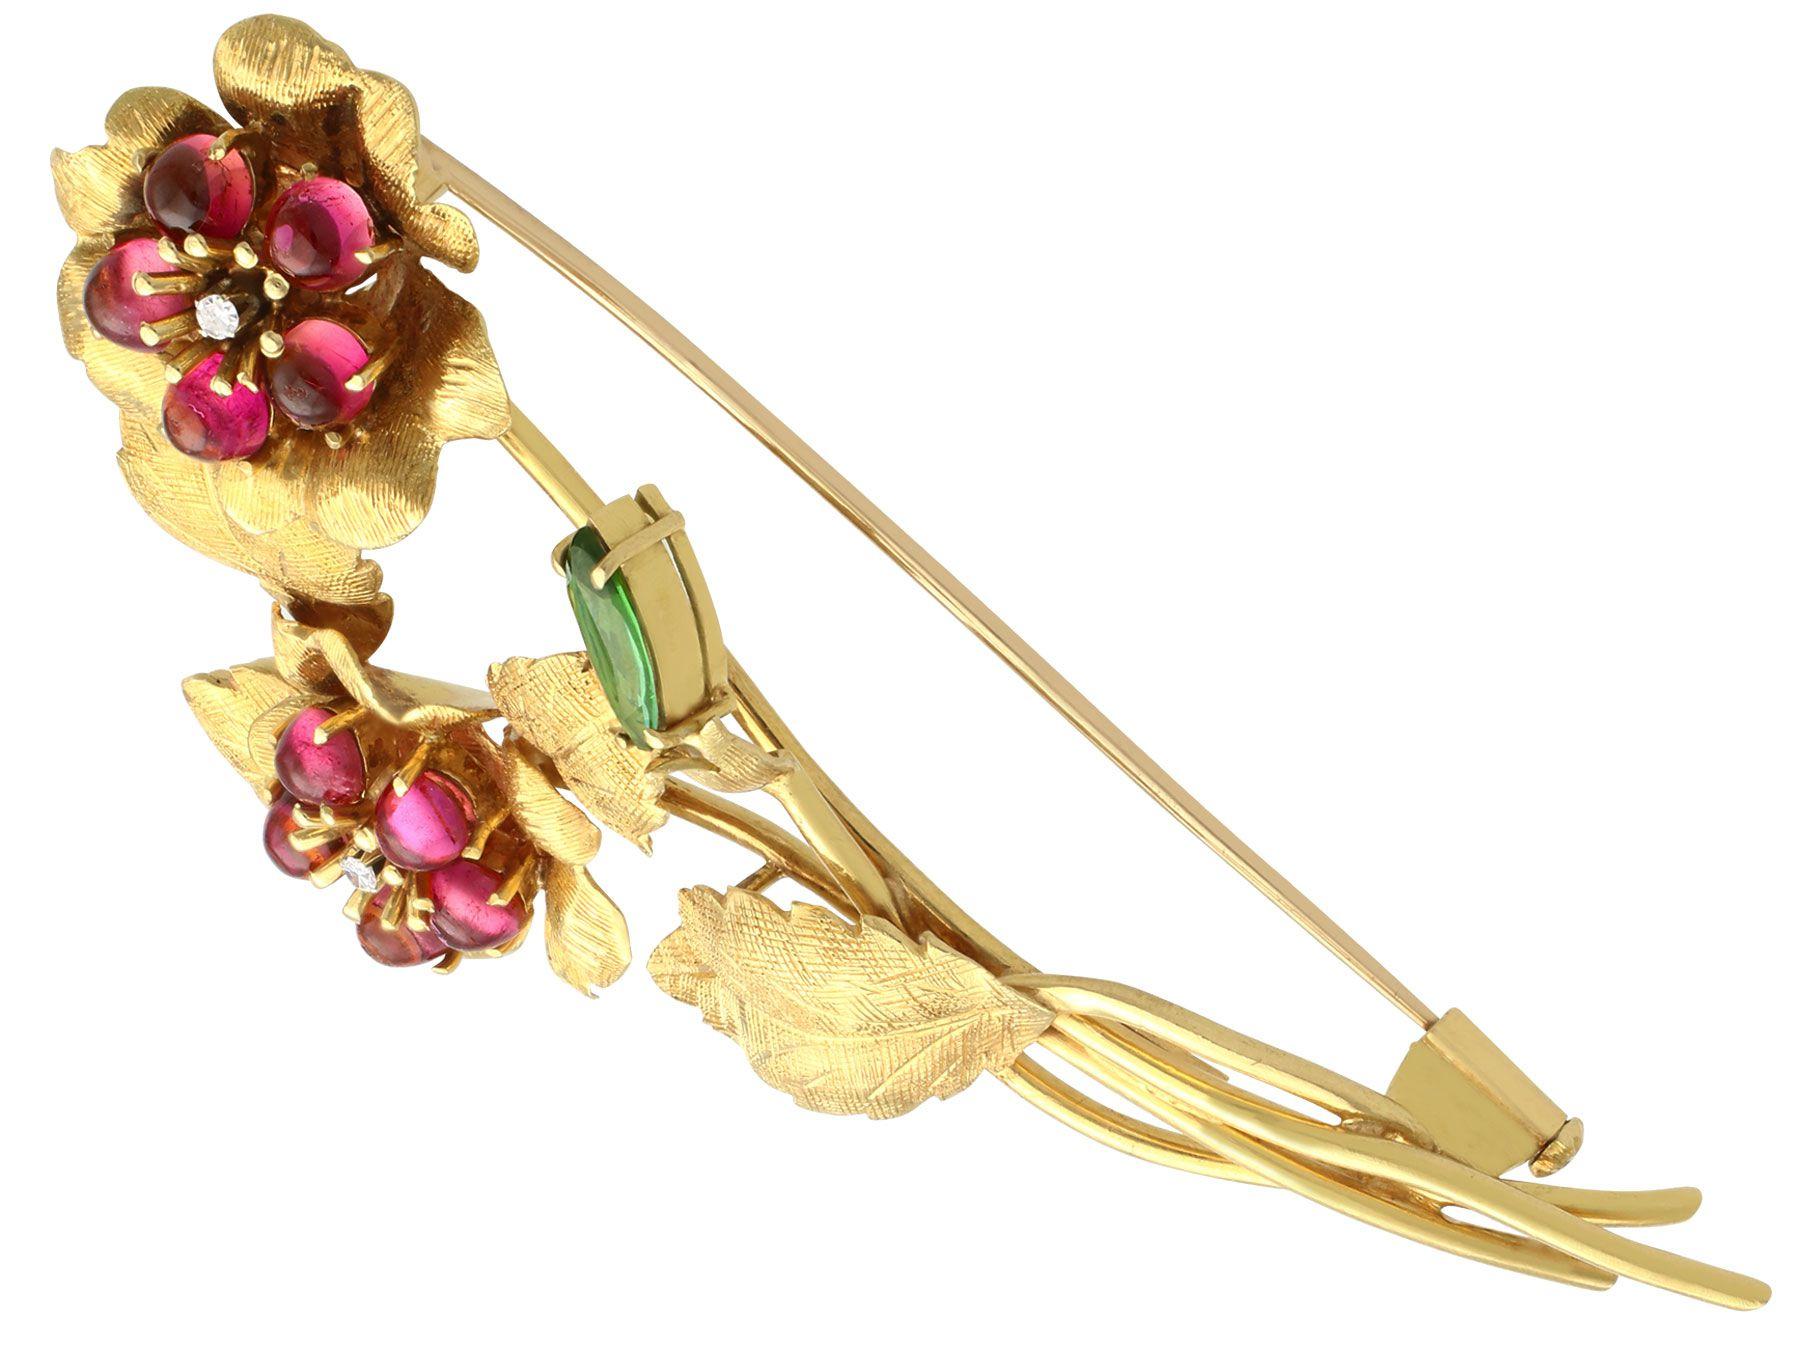 An impressive vintage 1.75 carat tourmaline and 0.06 carat diamond, 18 karat yellow gold spray brooch by 'Liberty'; part of our diverse vintage jewelry collections

This fine and impressive vintage floral brooch has been crafted in 18k yellow